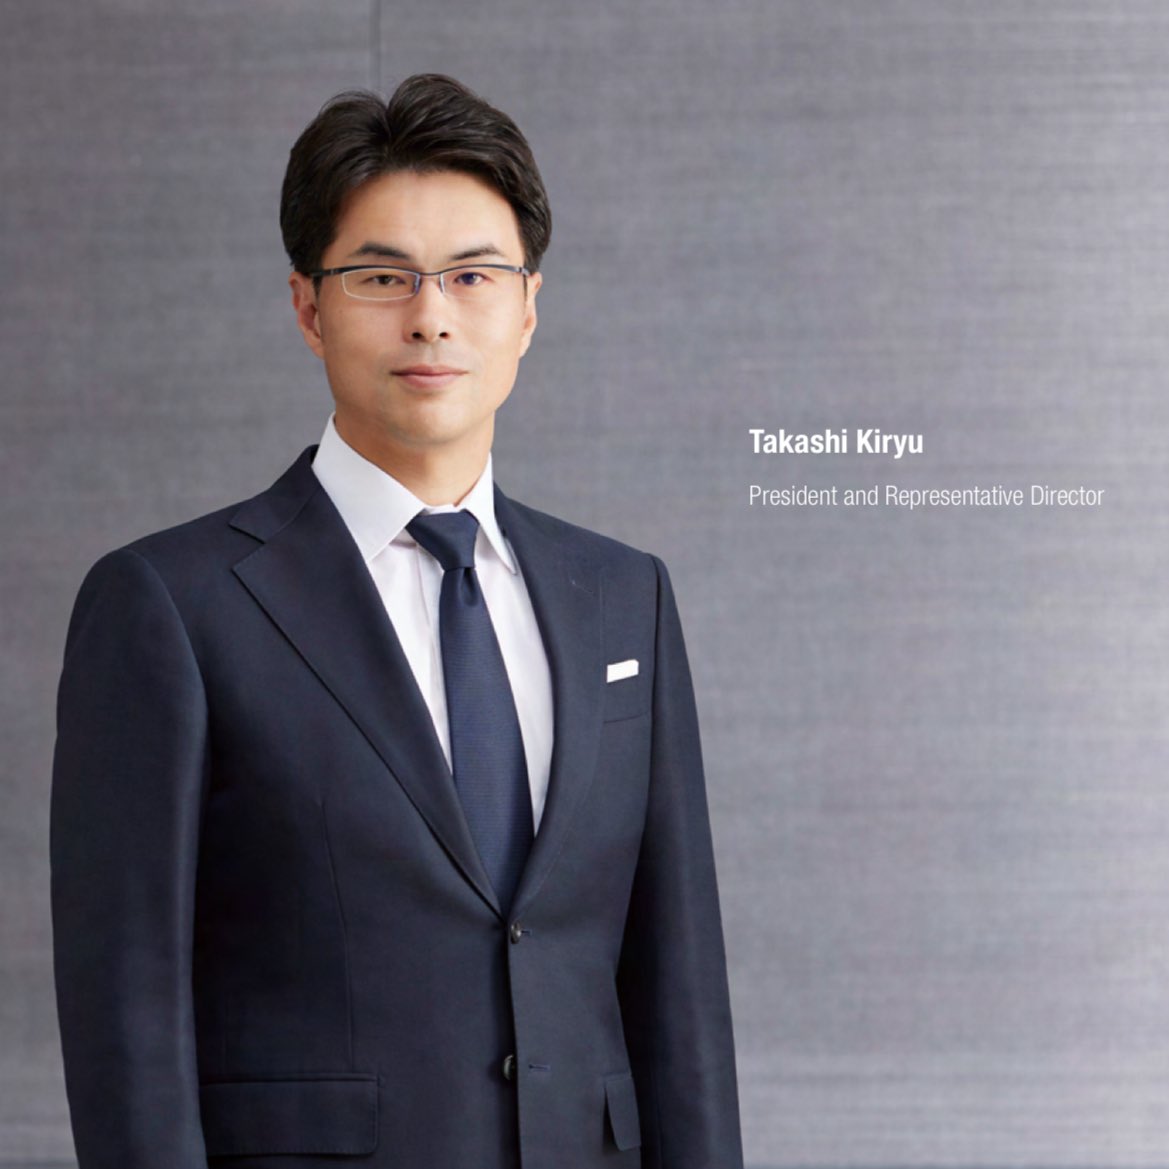 Square completed a large scale reorganization on Monday according to Bloomberg. The promotions of Naoki Hamaguchi, Tomoya Asano and Takeshi Nozue were part of this change. More younger staff will become the faces of their many series.